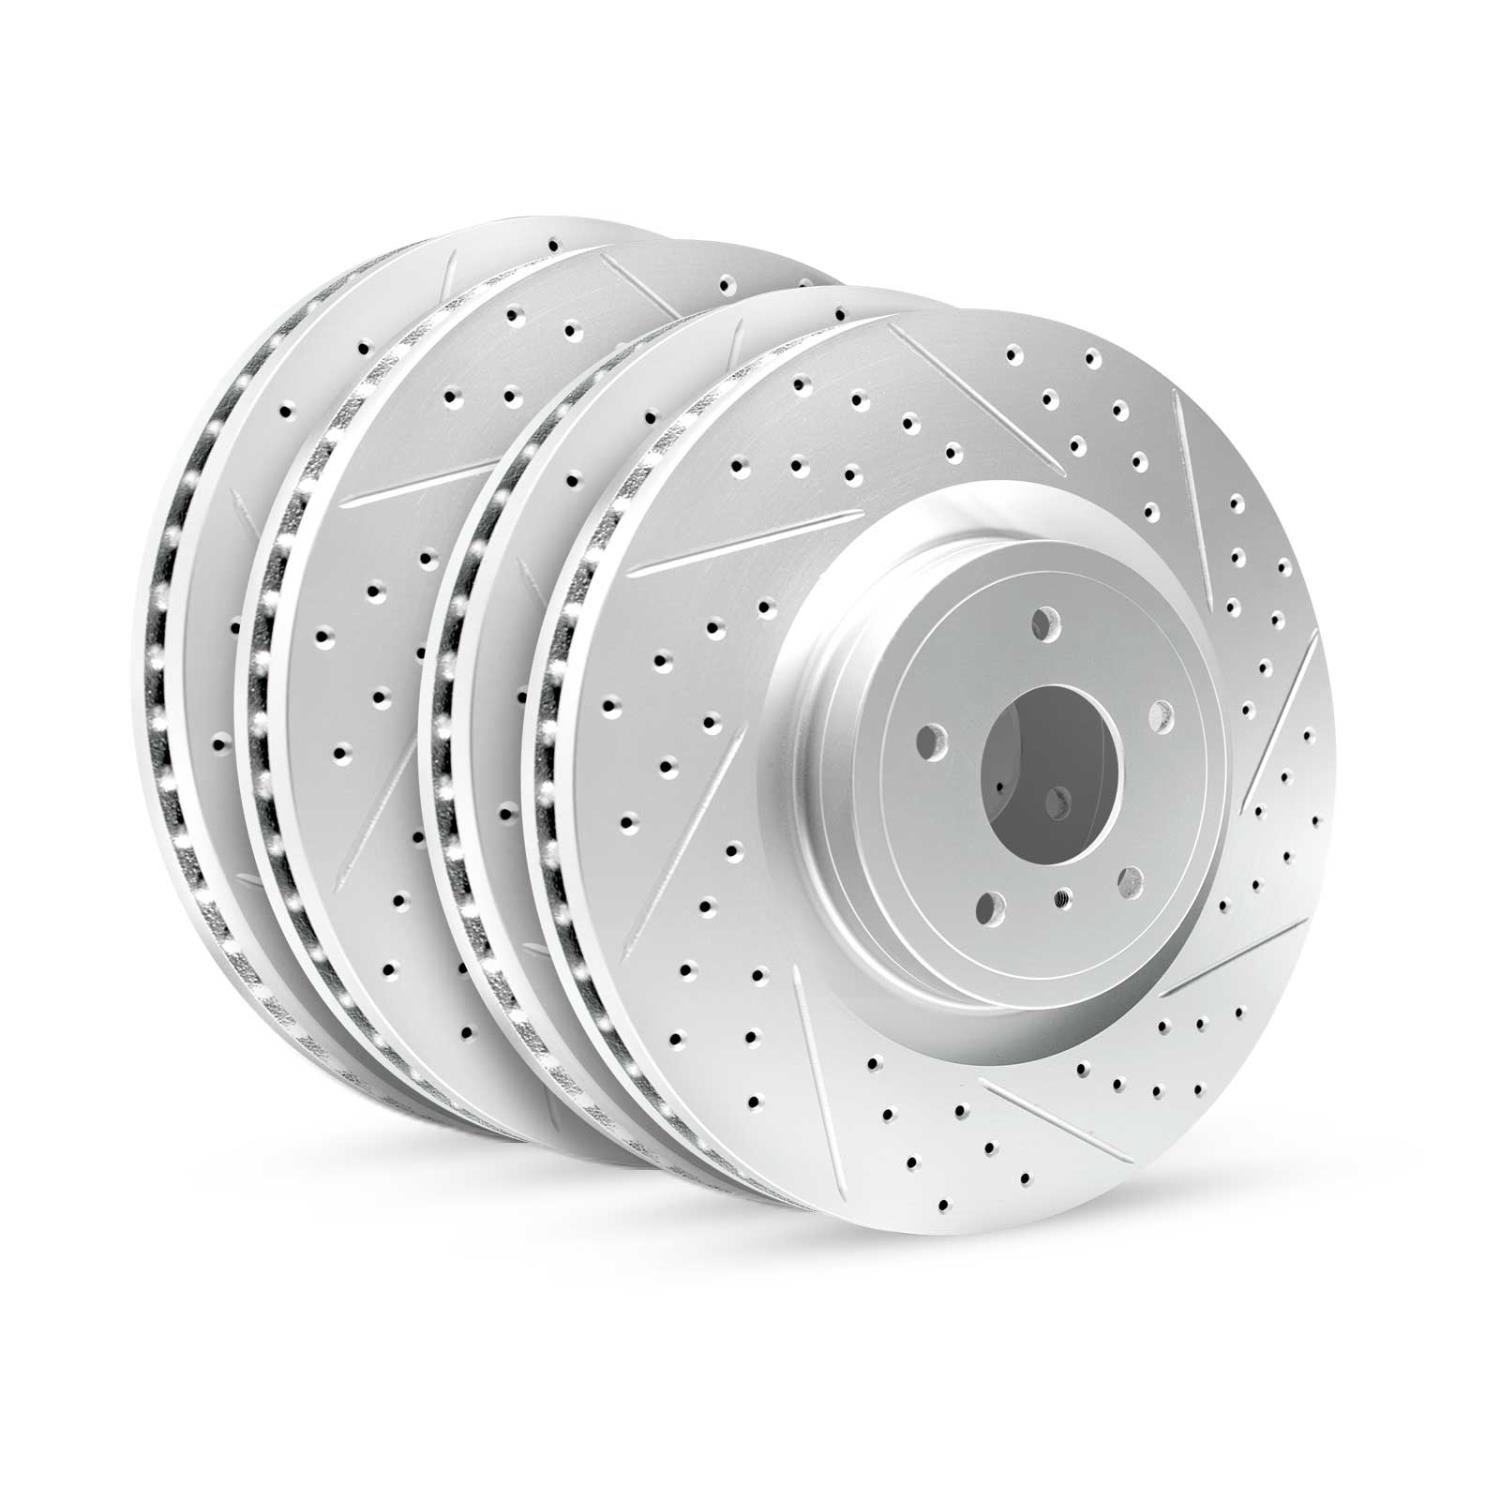 GEO-Carbon Drilled/Slotted Rotors, 2008-2015 Mitsubishi, Position: Front/Rear